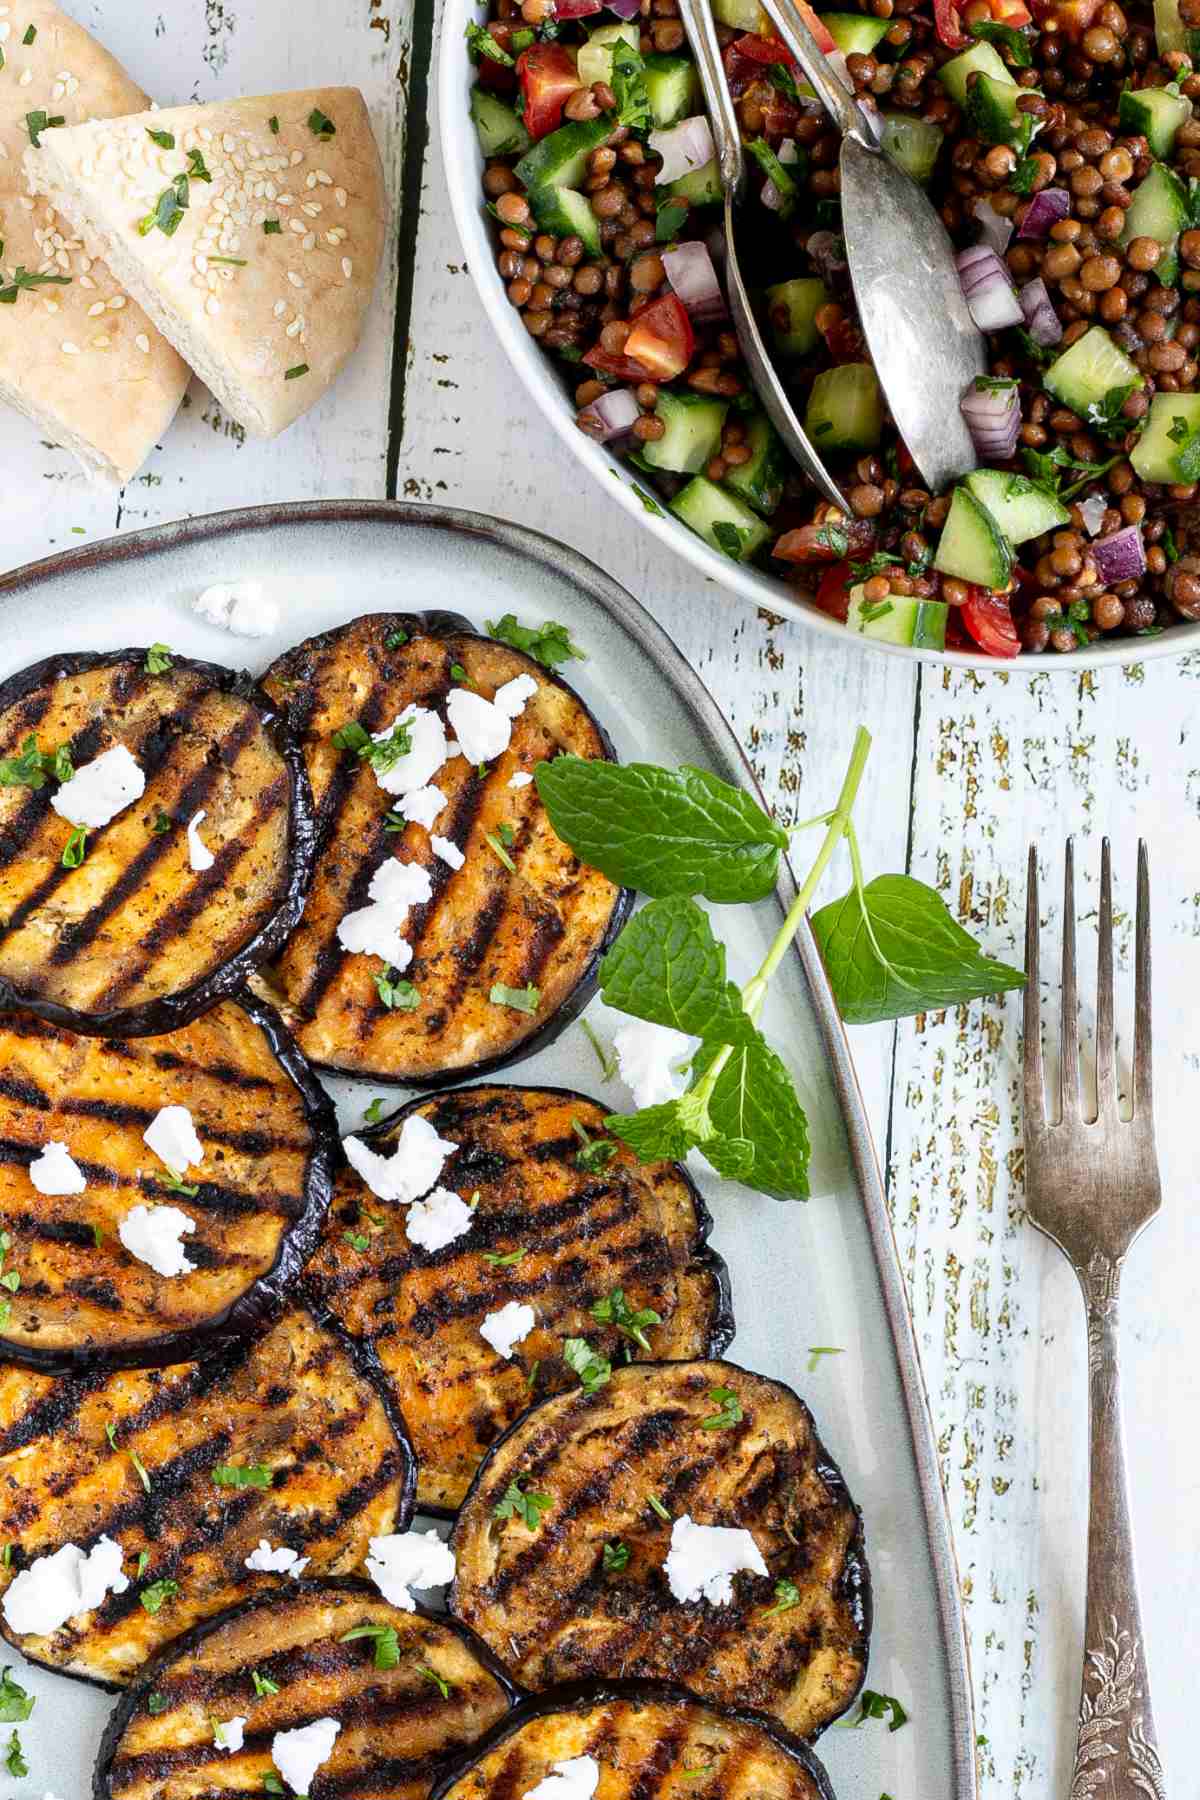 Large grilled slices of eggplant sprinkled with fresh herbs and crumbled cheese served on a light blue plate.